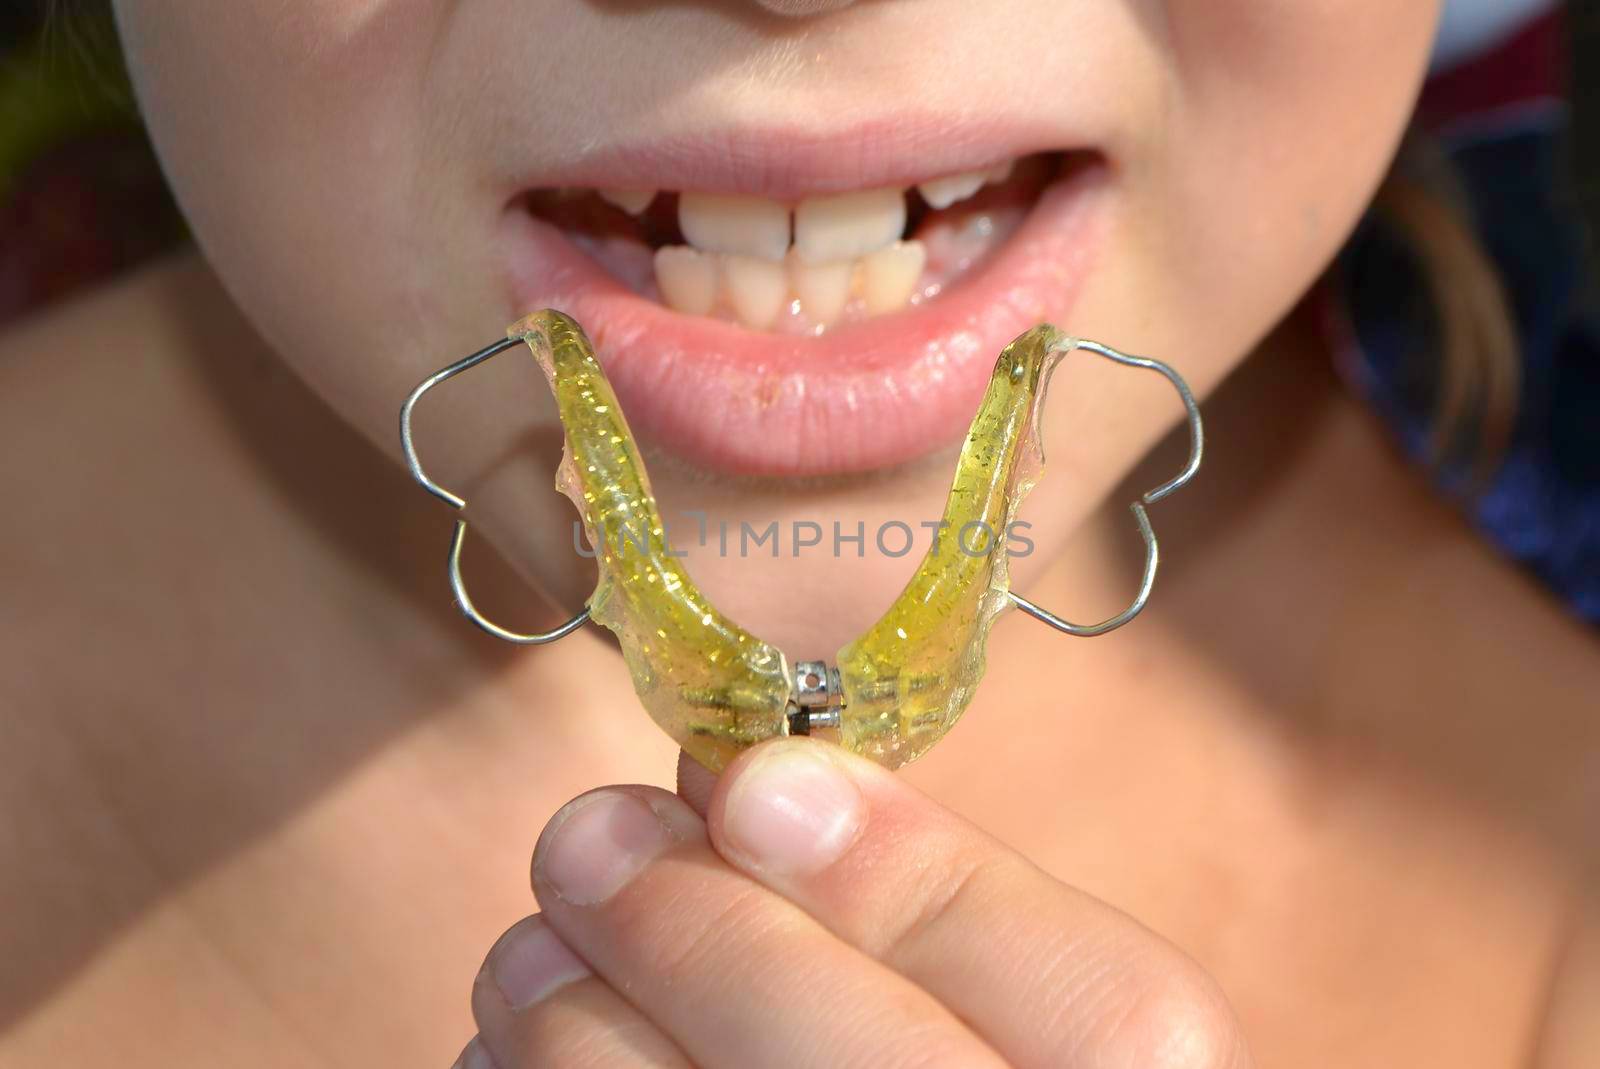 Dental plate. Expansion of the jaw in a child by milastokerpro